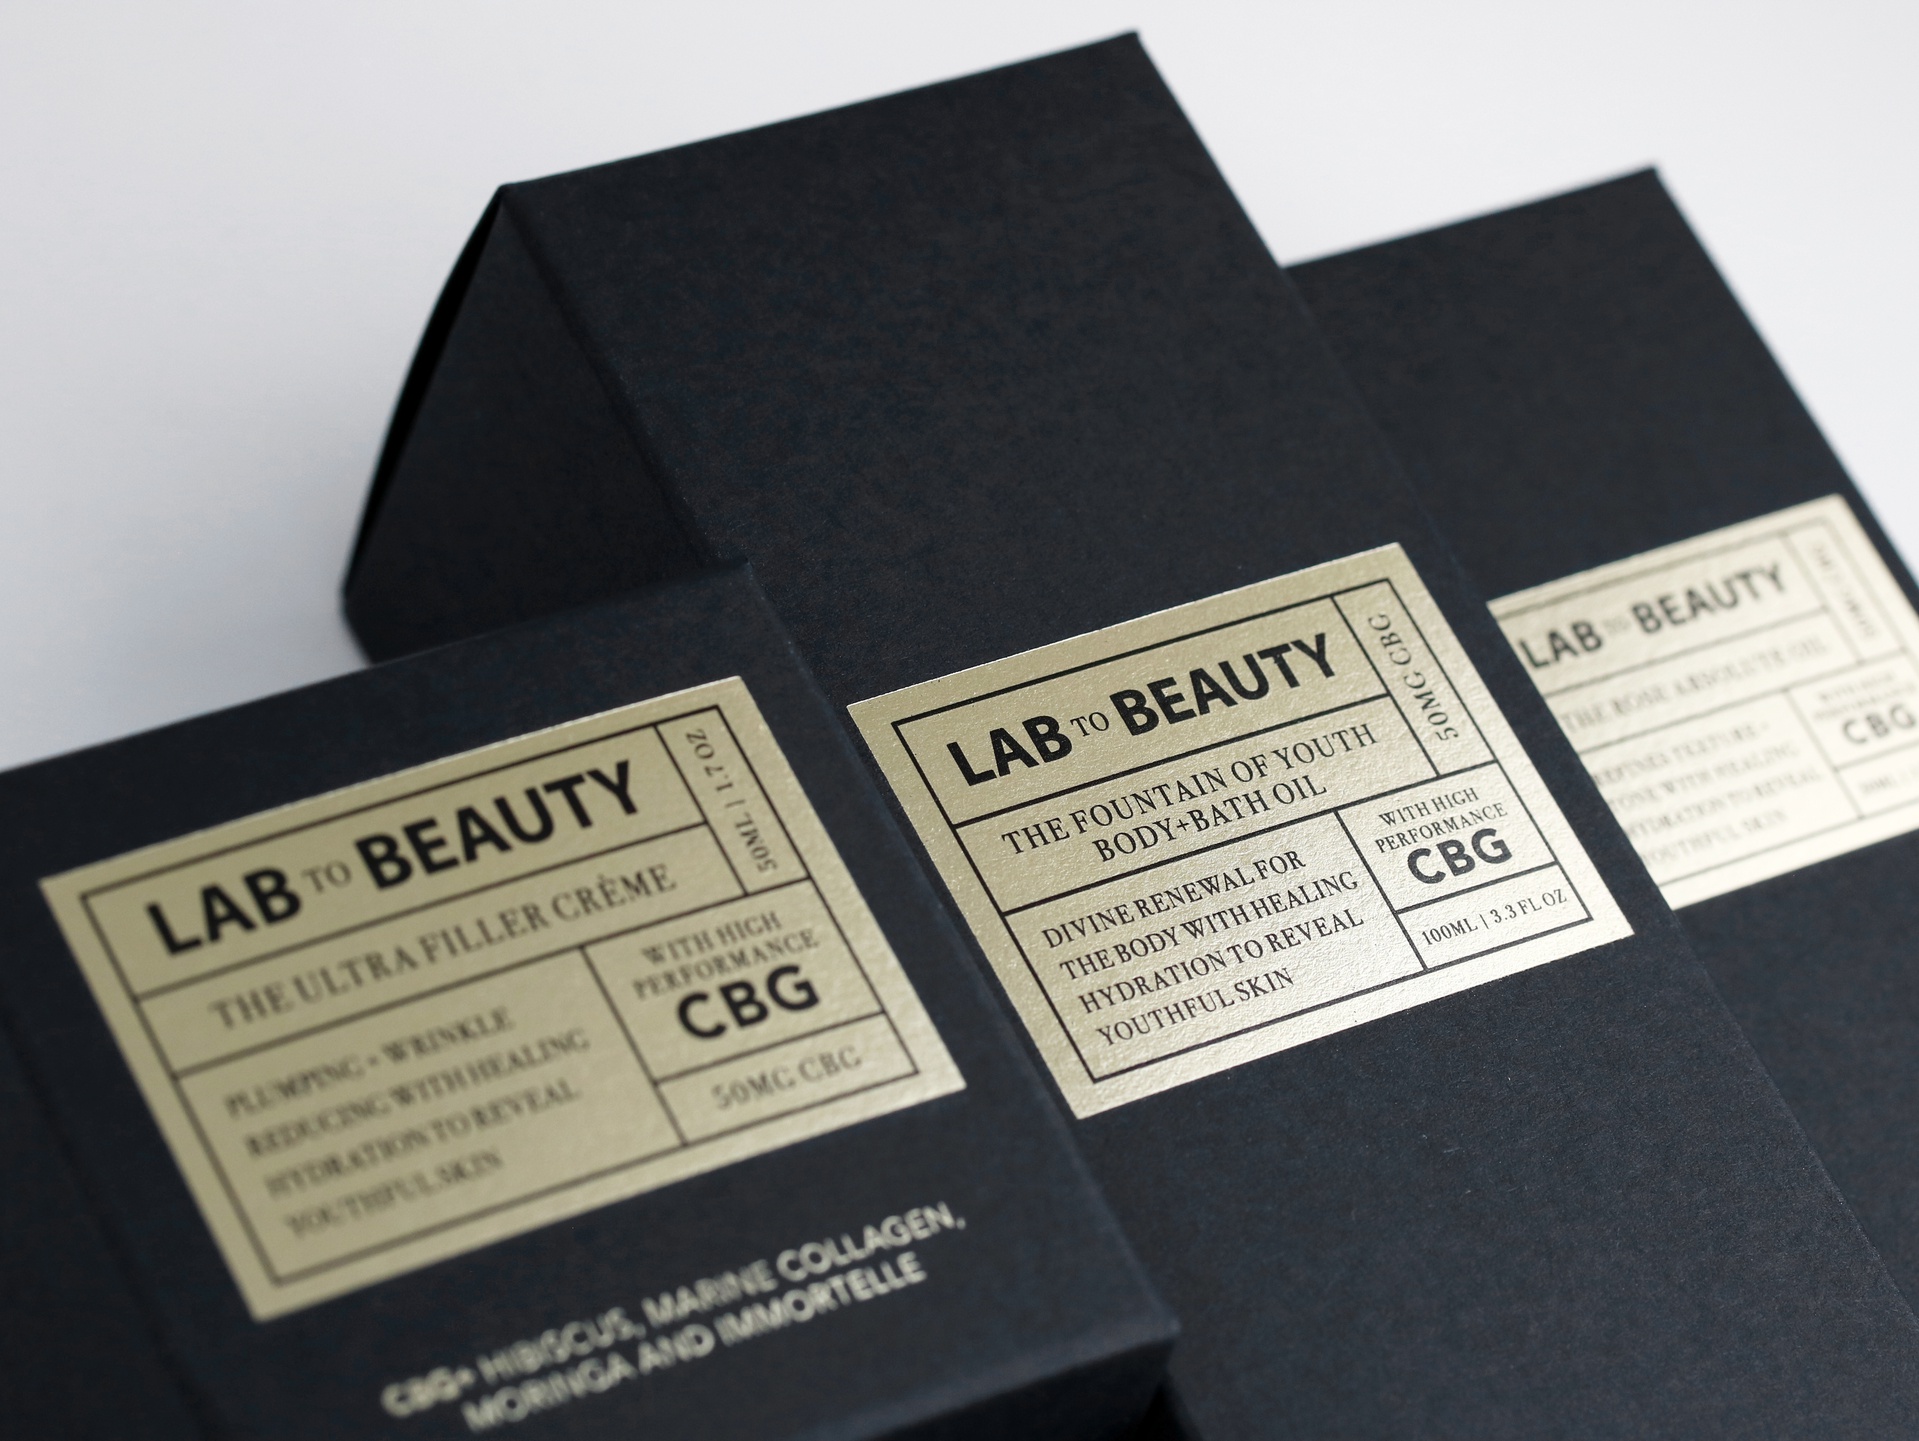 Lab to Beauty CBG packaging features gold hot foil stamping